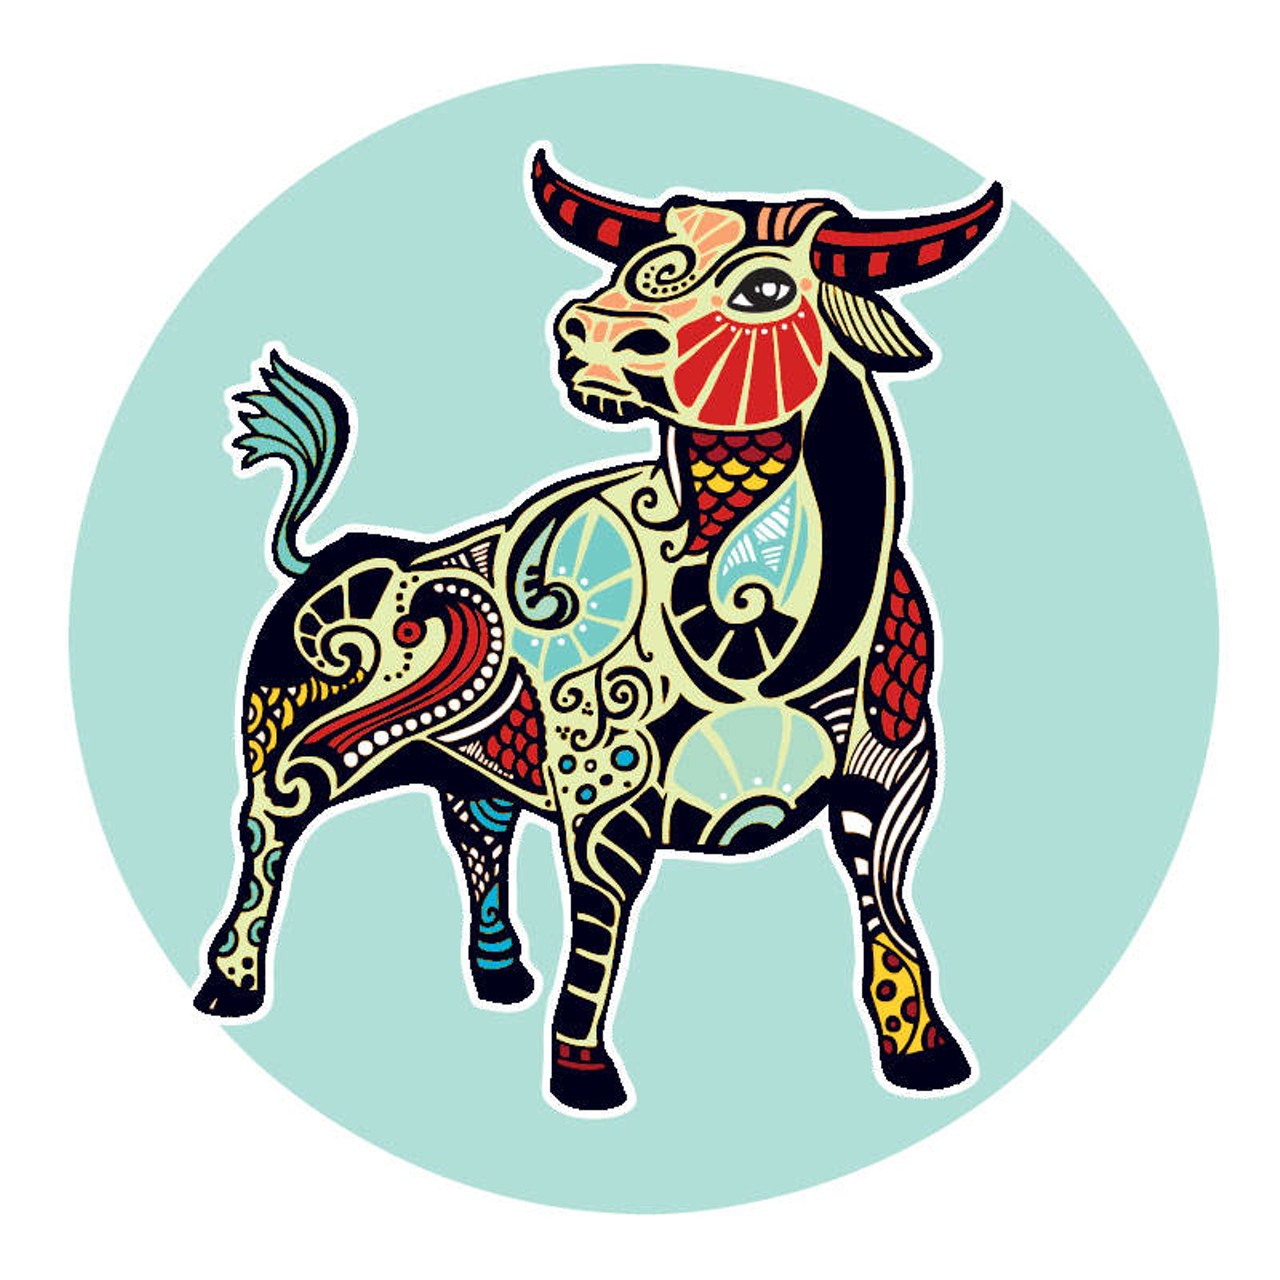 TAURUS&nbsp;(April 21 -May 20):
You are a totally down to earth person who needs to bring other aspects of your consciousness into play. Opening your mind to alternative ways of living and being will only make what is grounded stronger and more enlightened. This opening process is important because those closest to you need more of who you really are to be present and accounted for. It could be your kids; it could be your partner; it could also be your work venue that is demanding more from you. These changes will introduce you to teaching and learning situations that will ultimately empower your future.